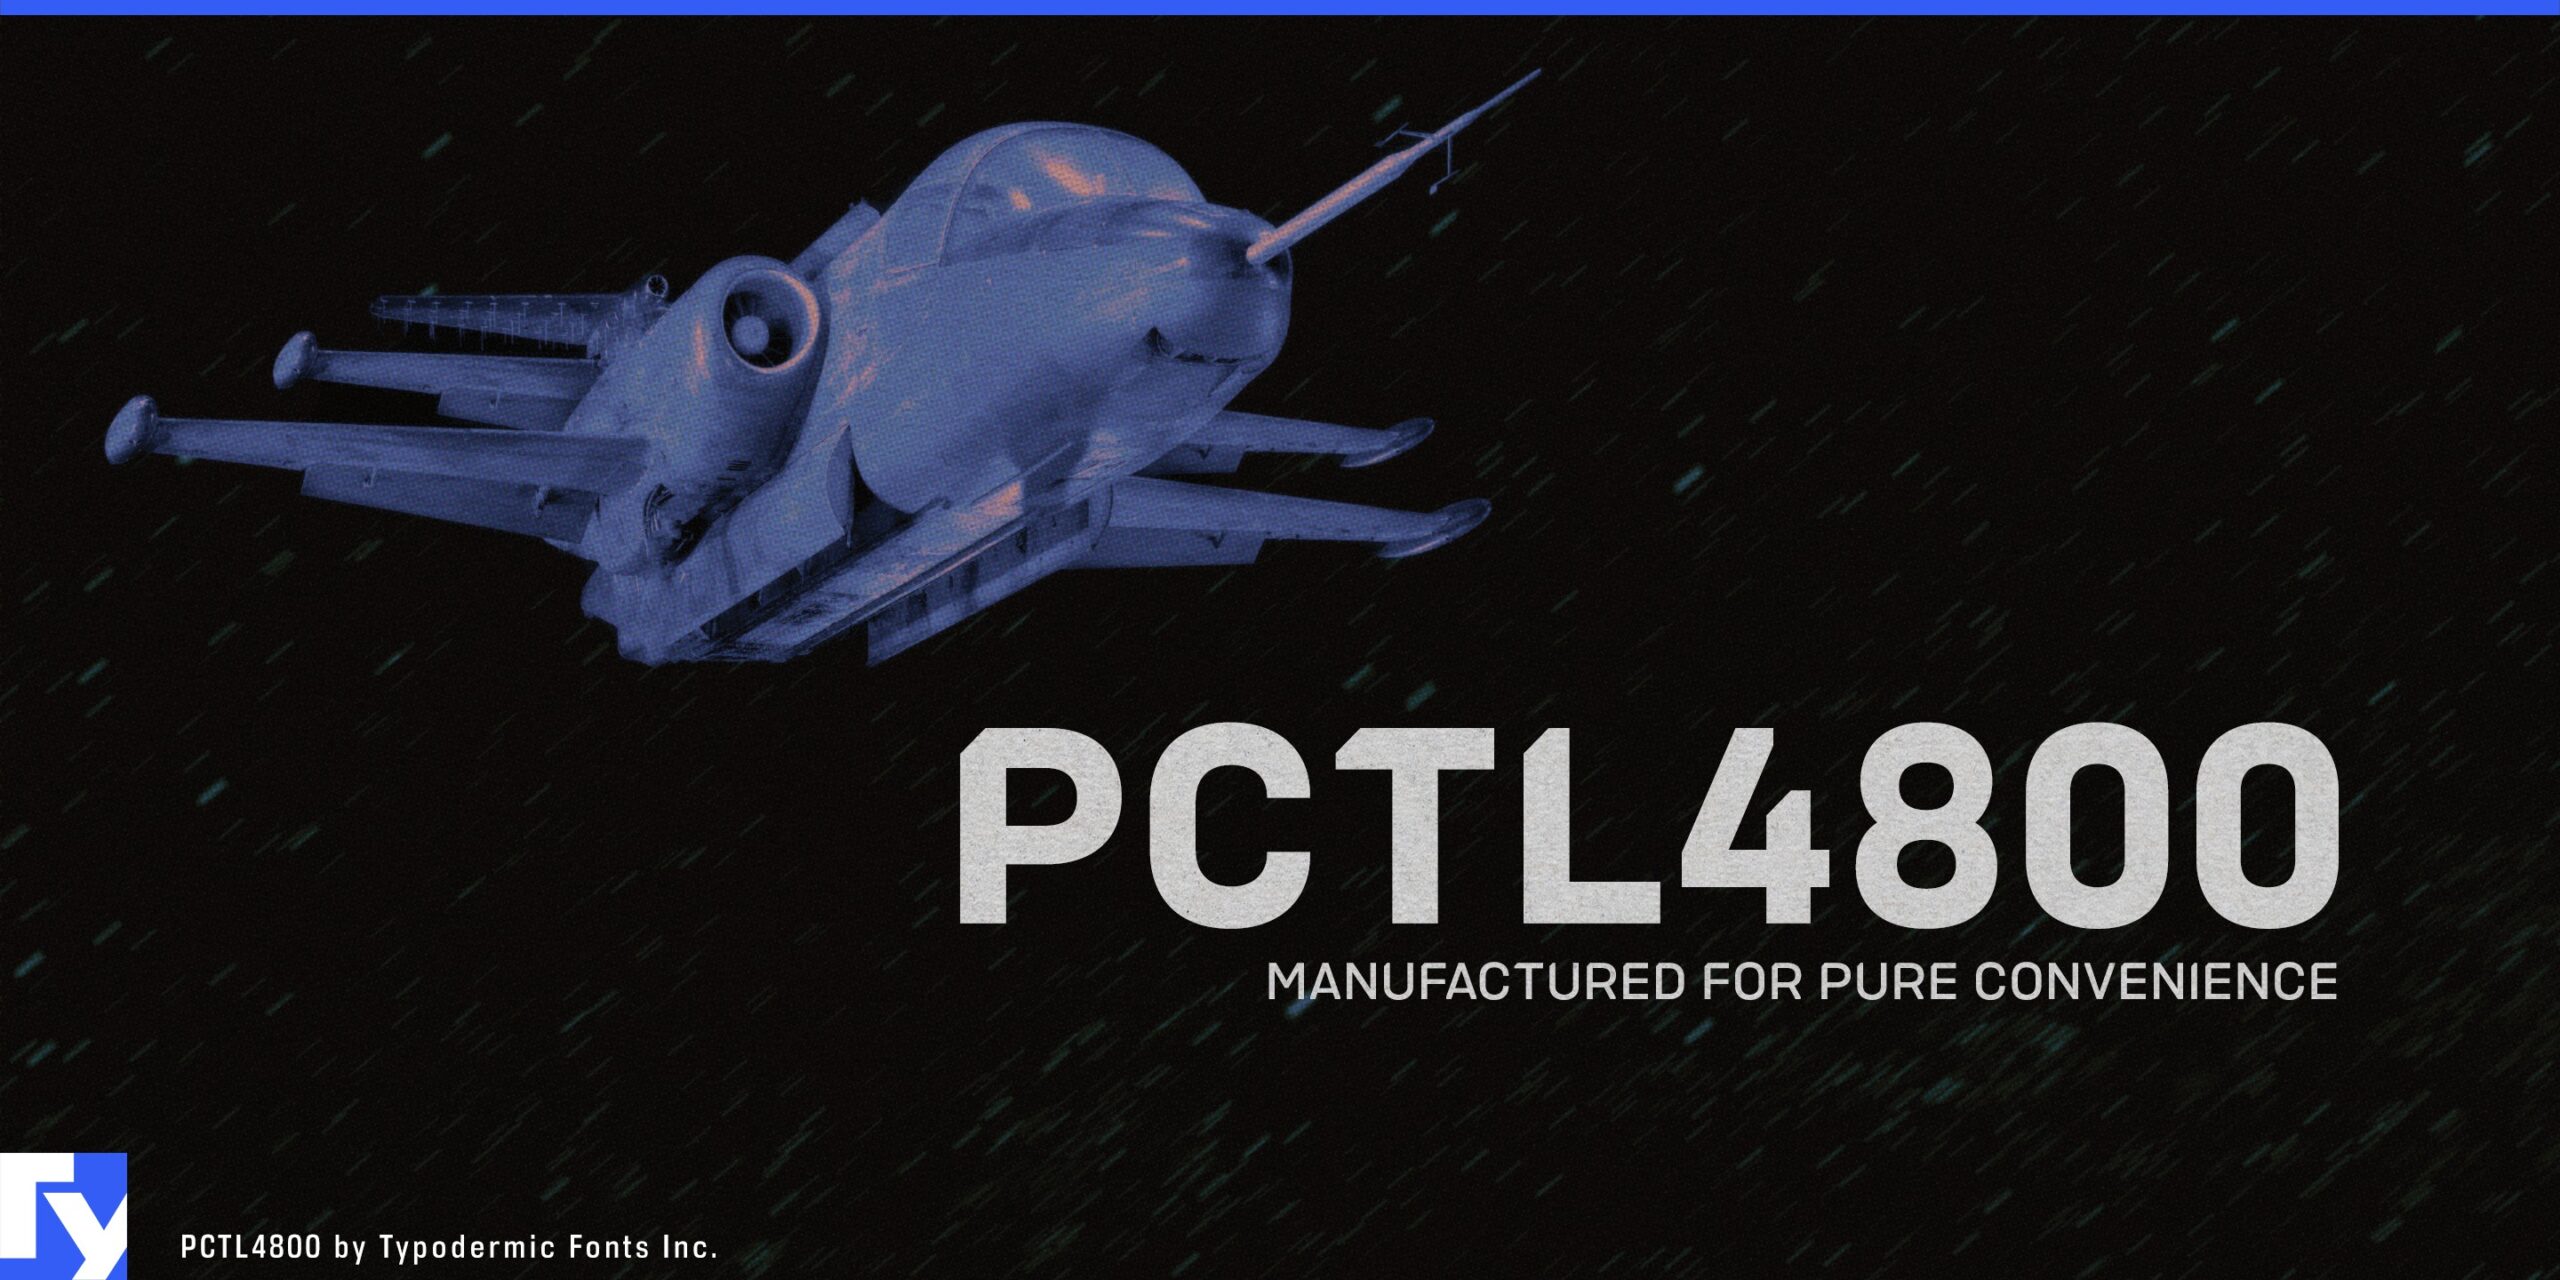 Design with Confidence: PCTL4800 Font Embodies Technical Excellence